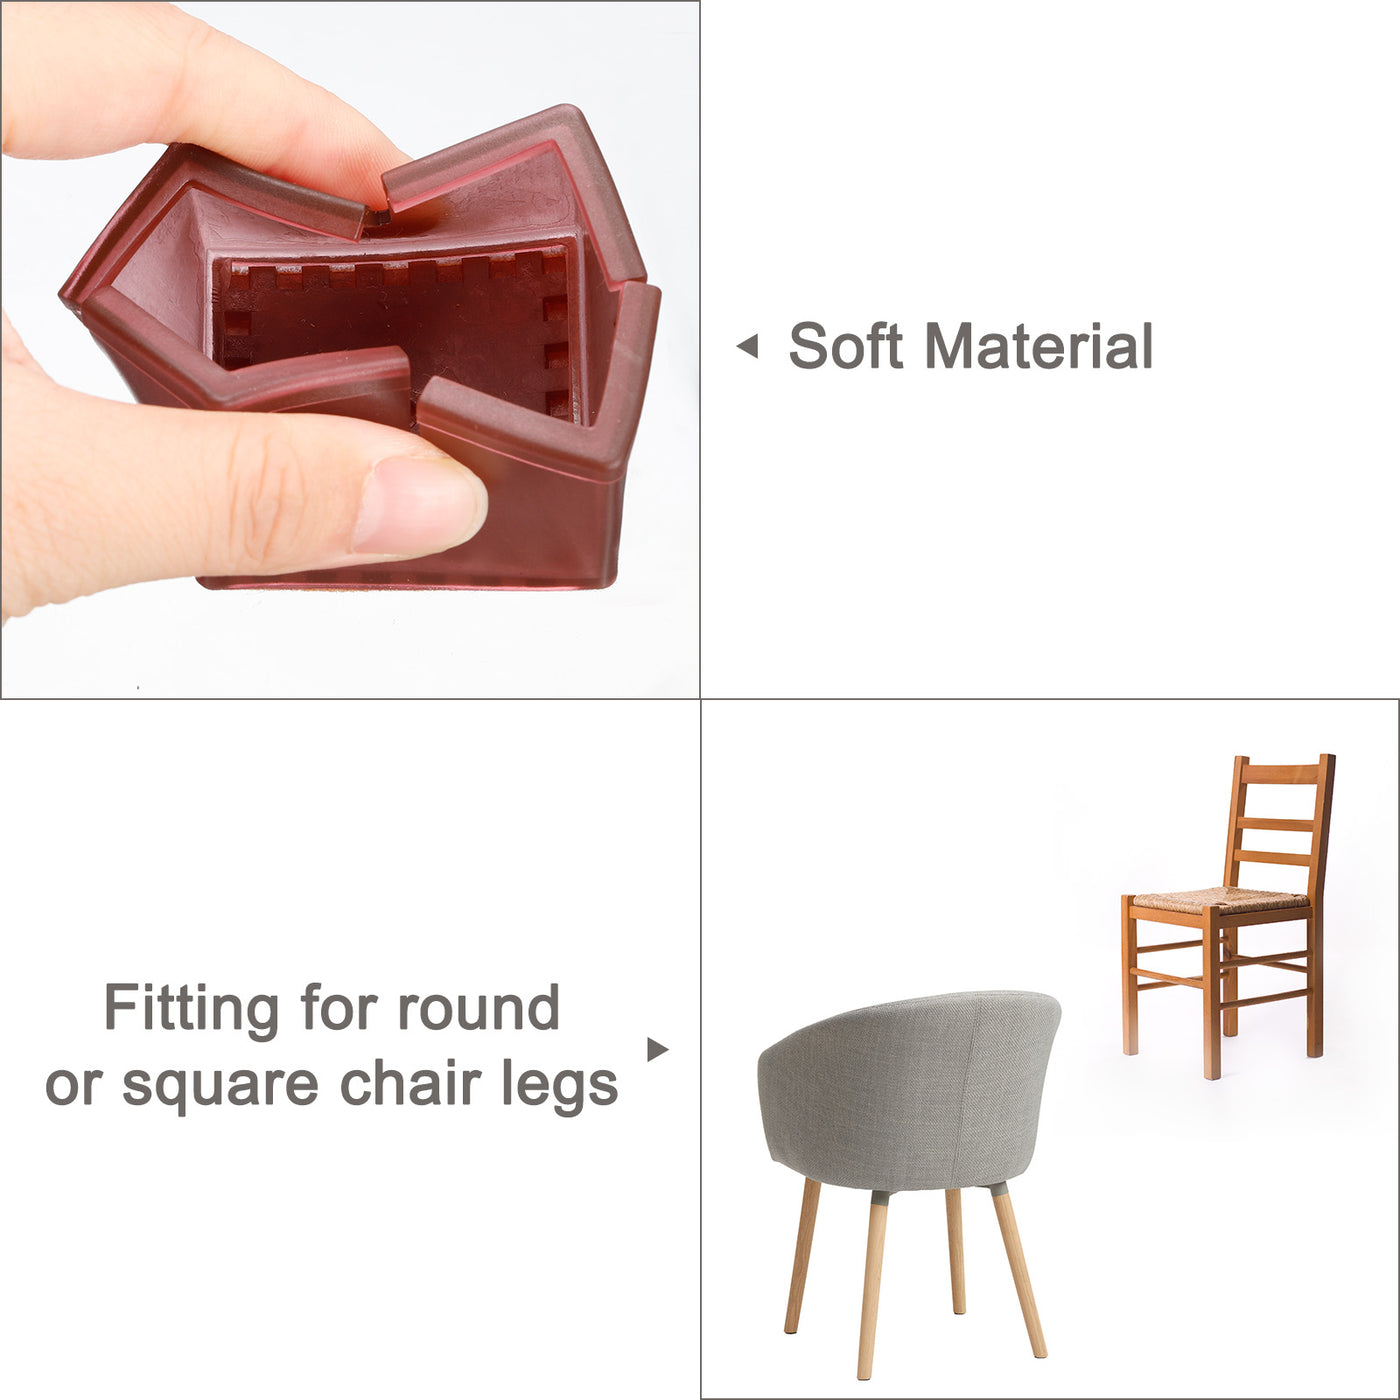 uxcell Uxcell Chair Leg Floor Protectors, 16Pcs 41mm(1.61") Square Silicone & Felt Chair Leg Cover Caps for Hardwood Floors (Wine Red)